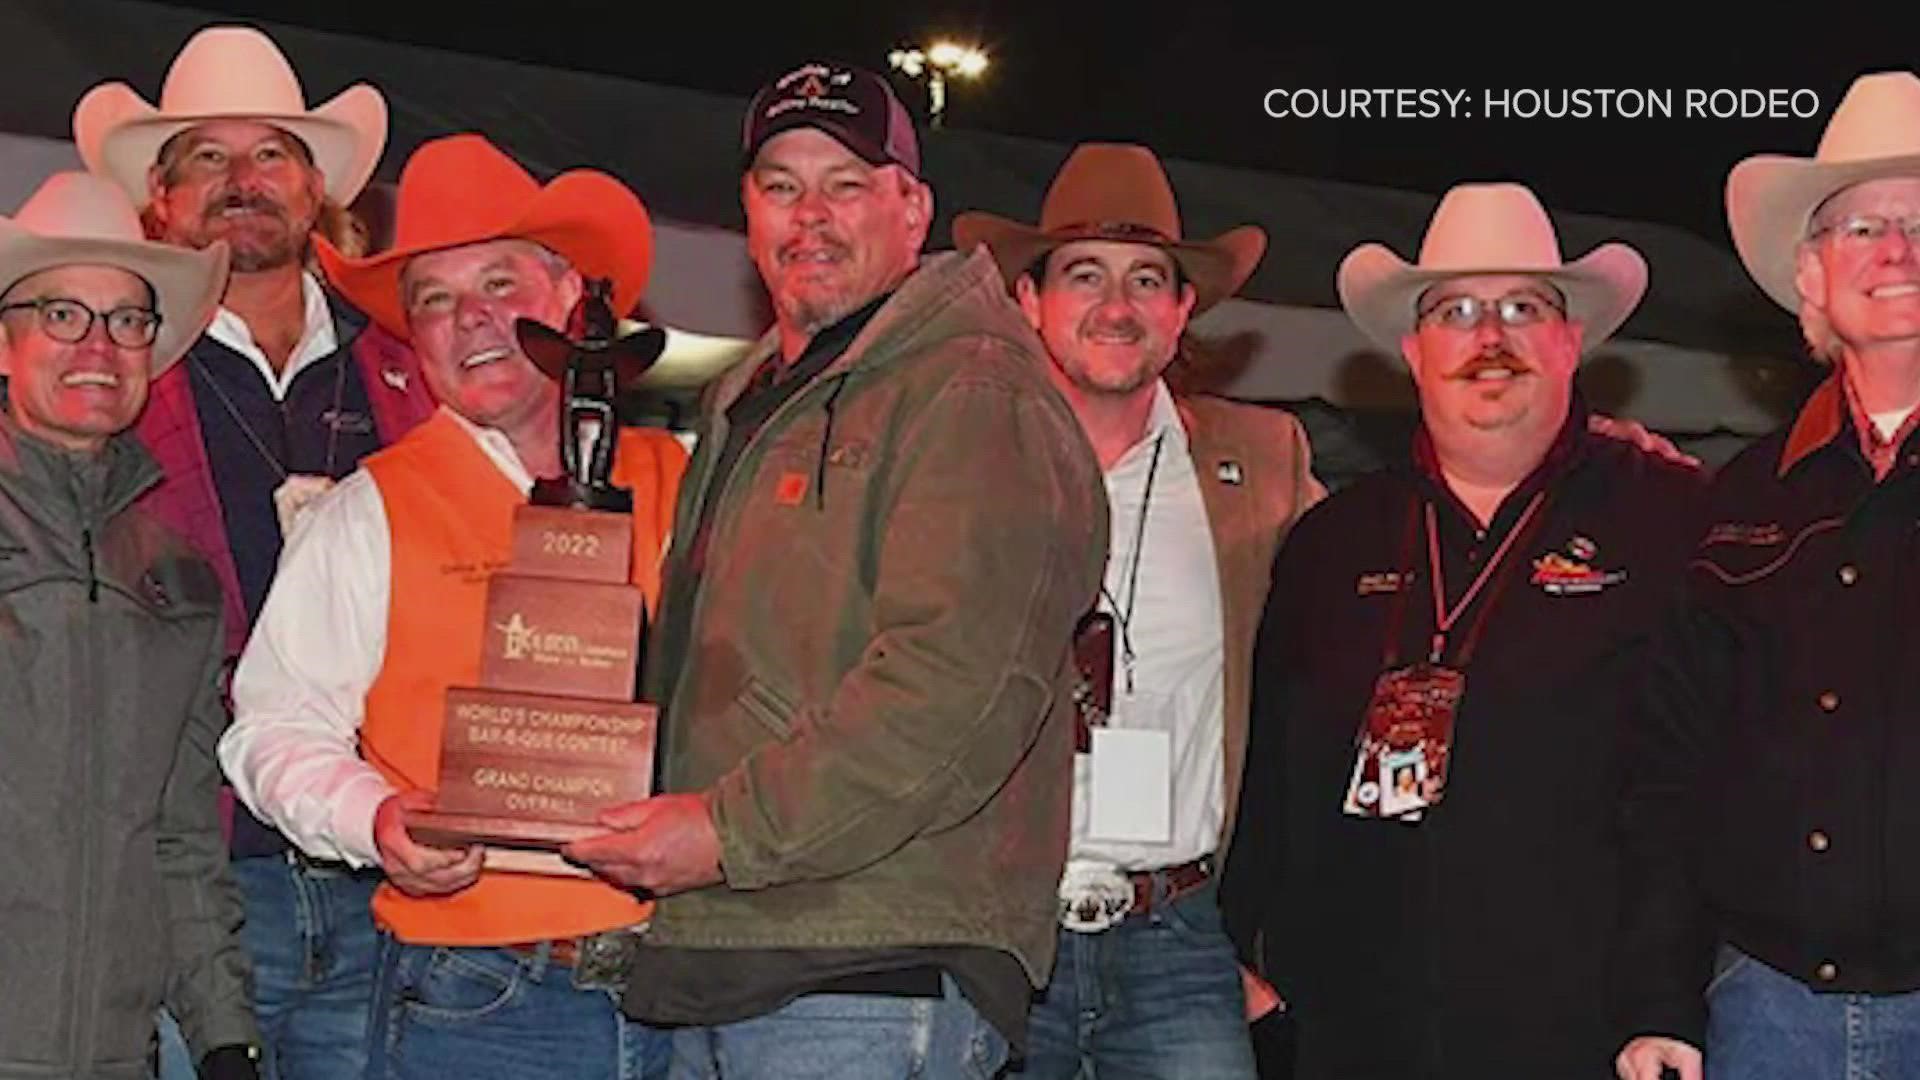 More than 250 barbecue teams competed from in Texas and around the world, with the grand prize going to a team from Williamson County.